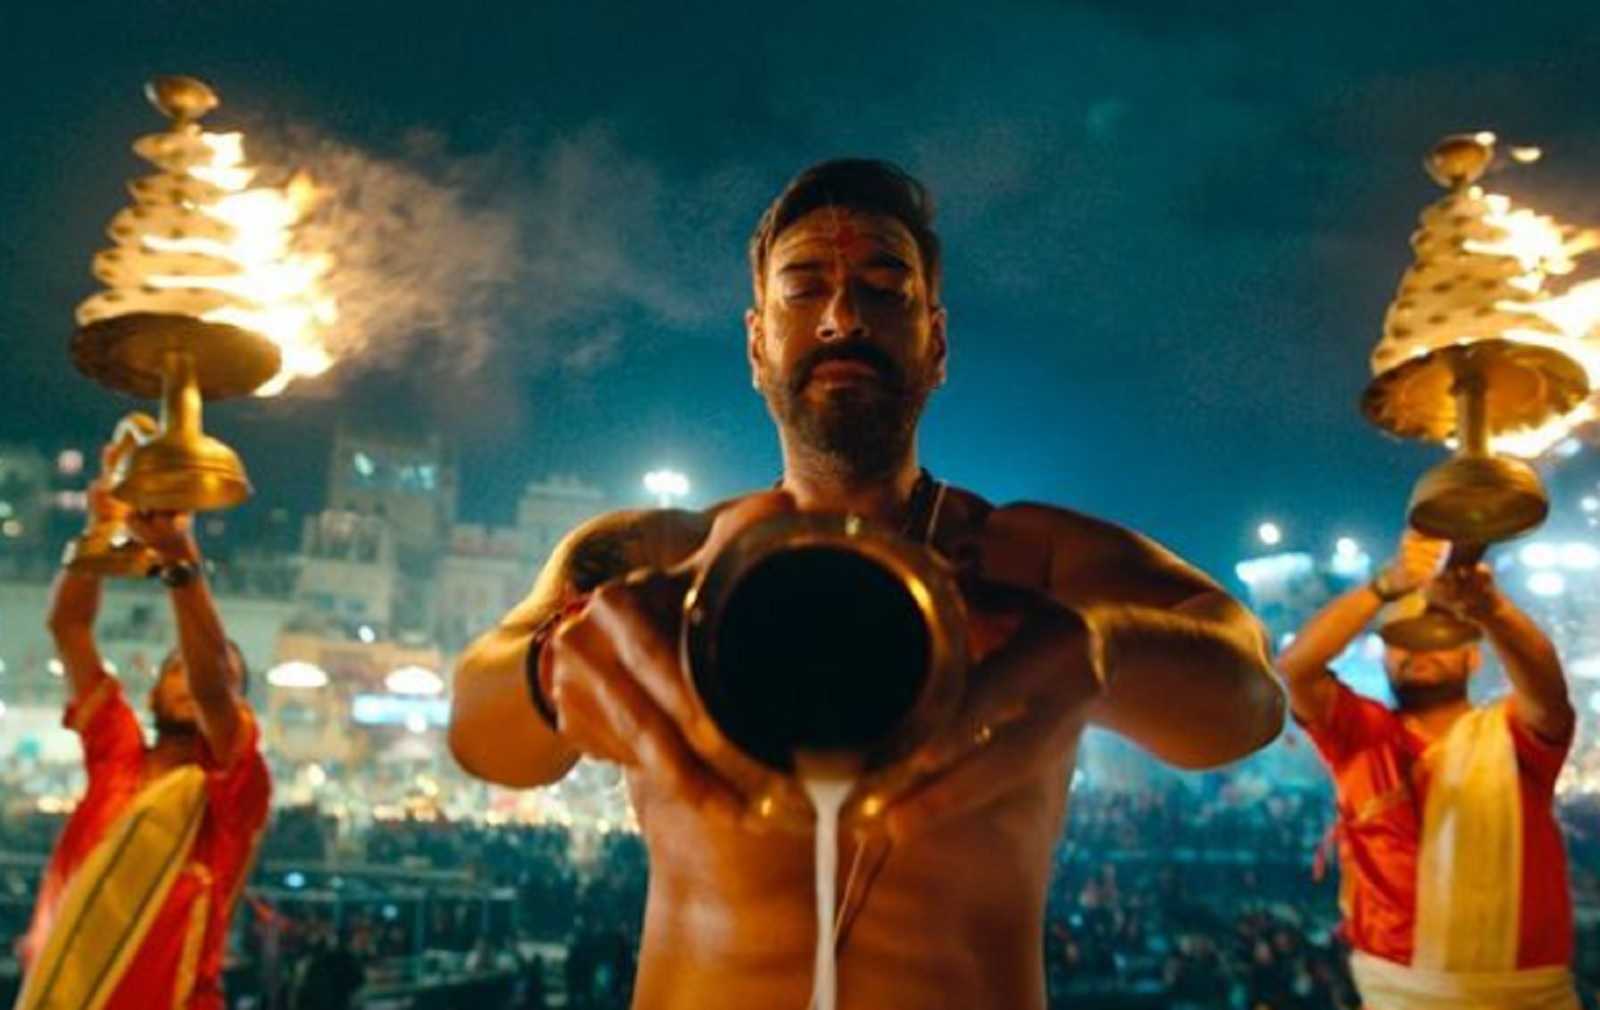 On Maha Shivratri 2023, Ajay Devgn reveals experiencing 'unmatchable power of divine' during Bholaa shoot